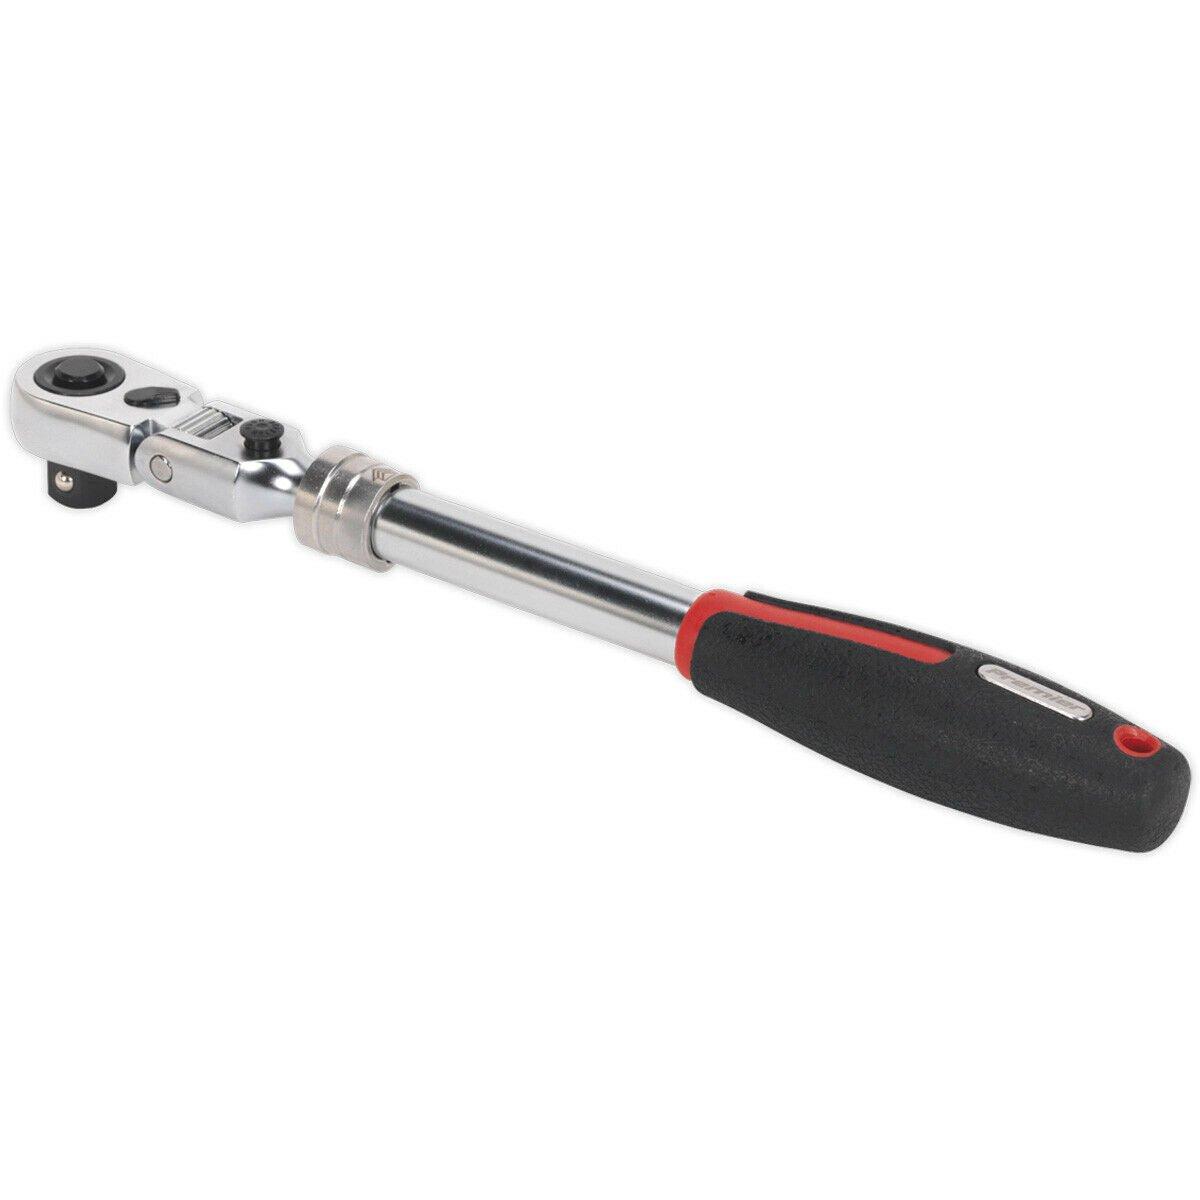 Extendable Ratchet Wrench - 1/2